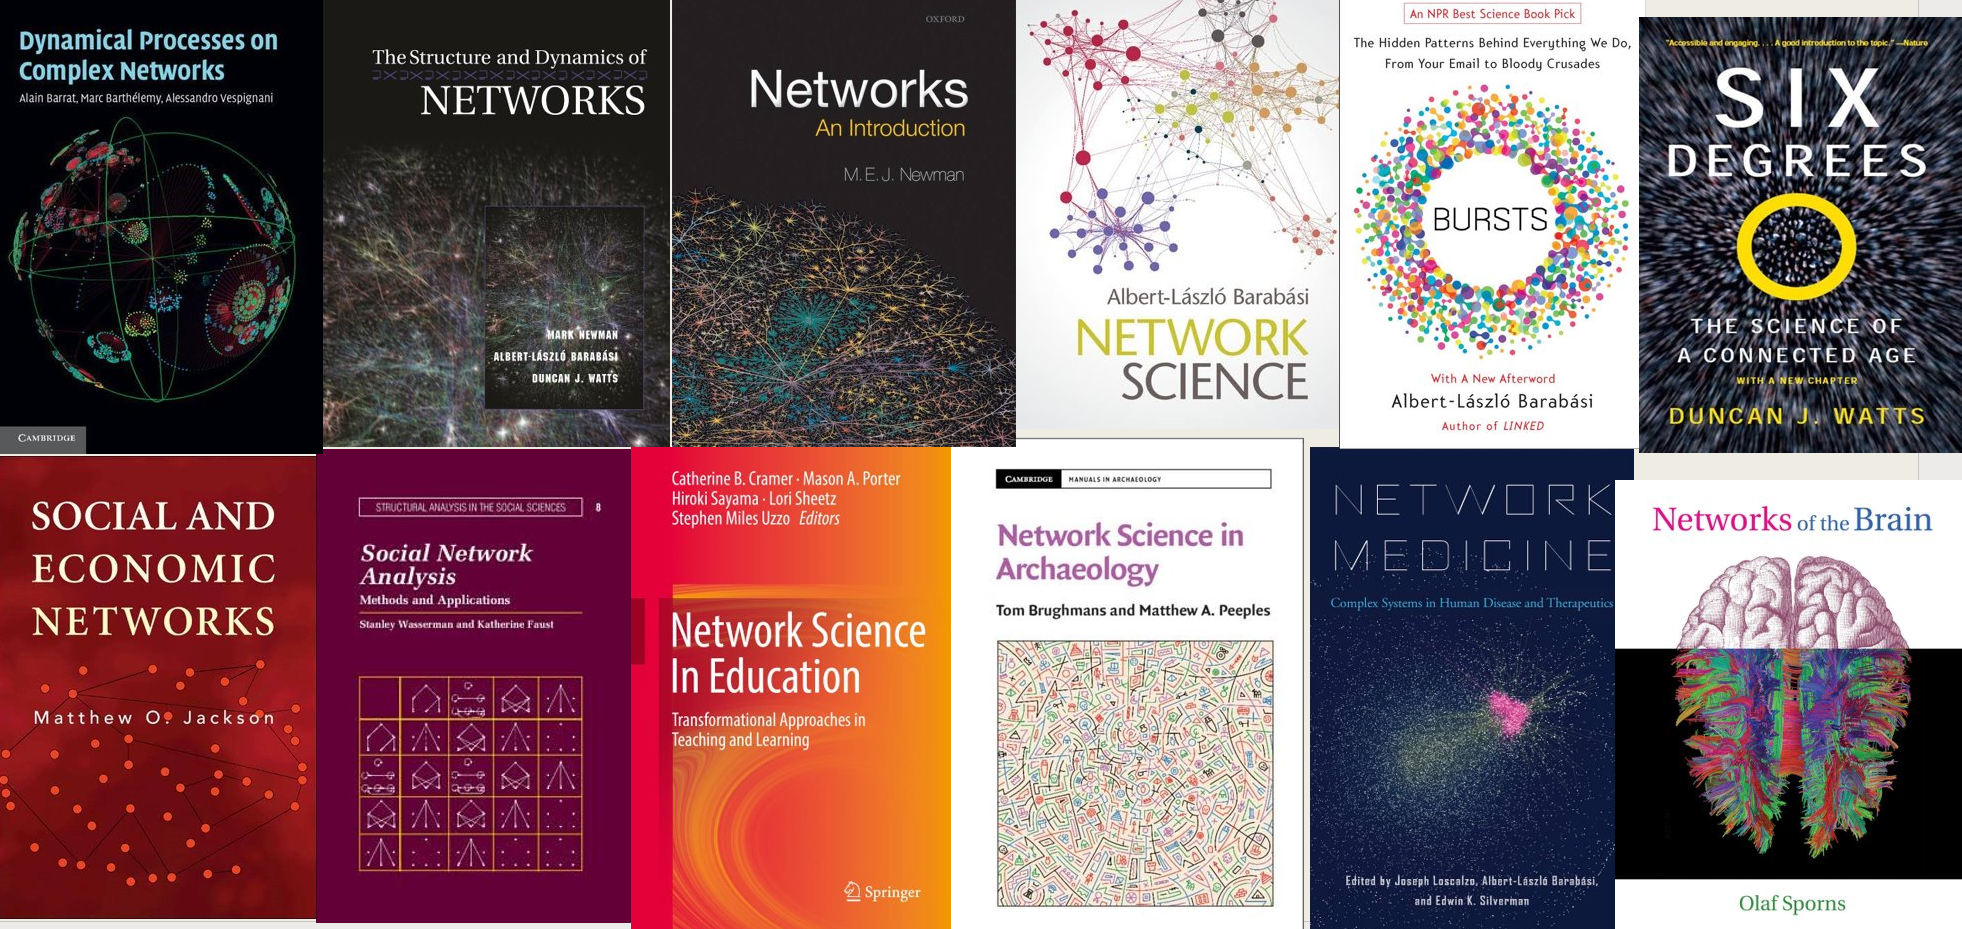 Network Science is used in various research fields